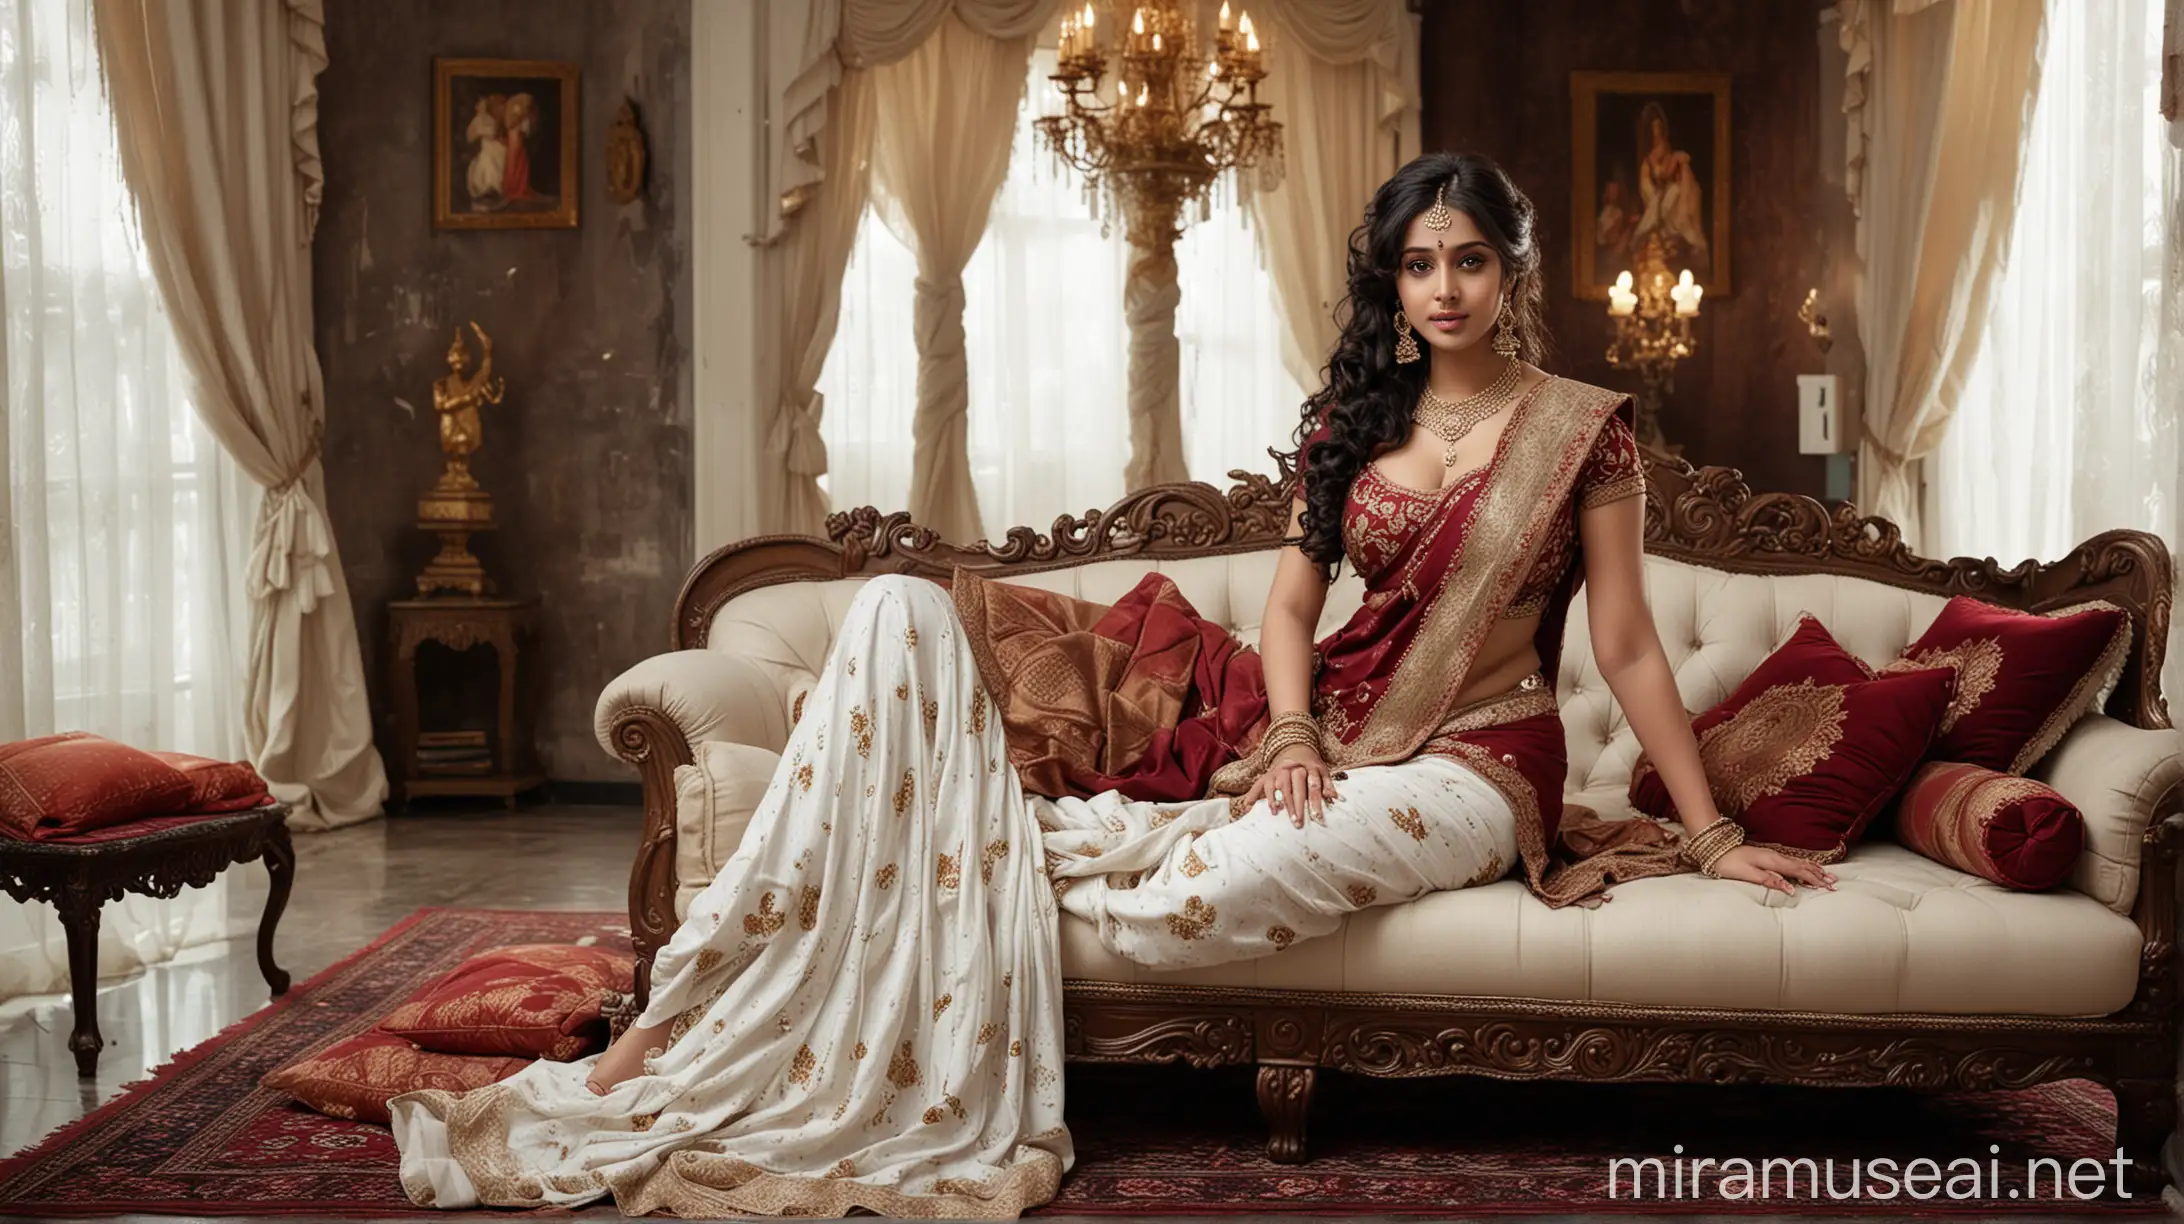 Elegant Indian Bride in Saree with Intricate Bridal Makeup and Jewelry